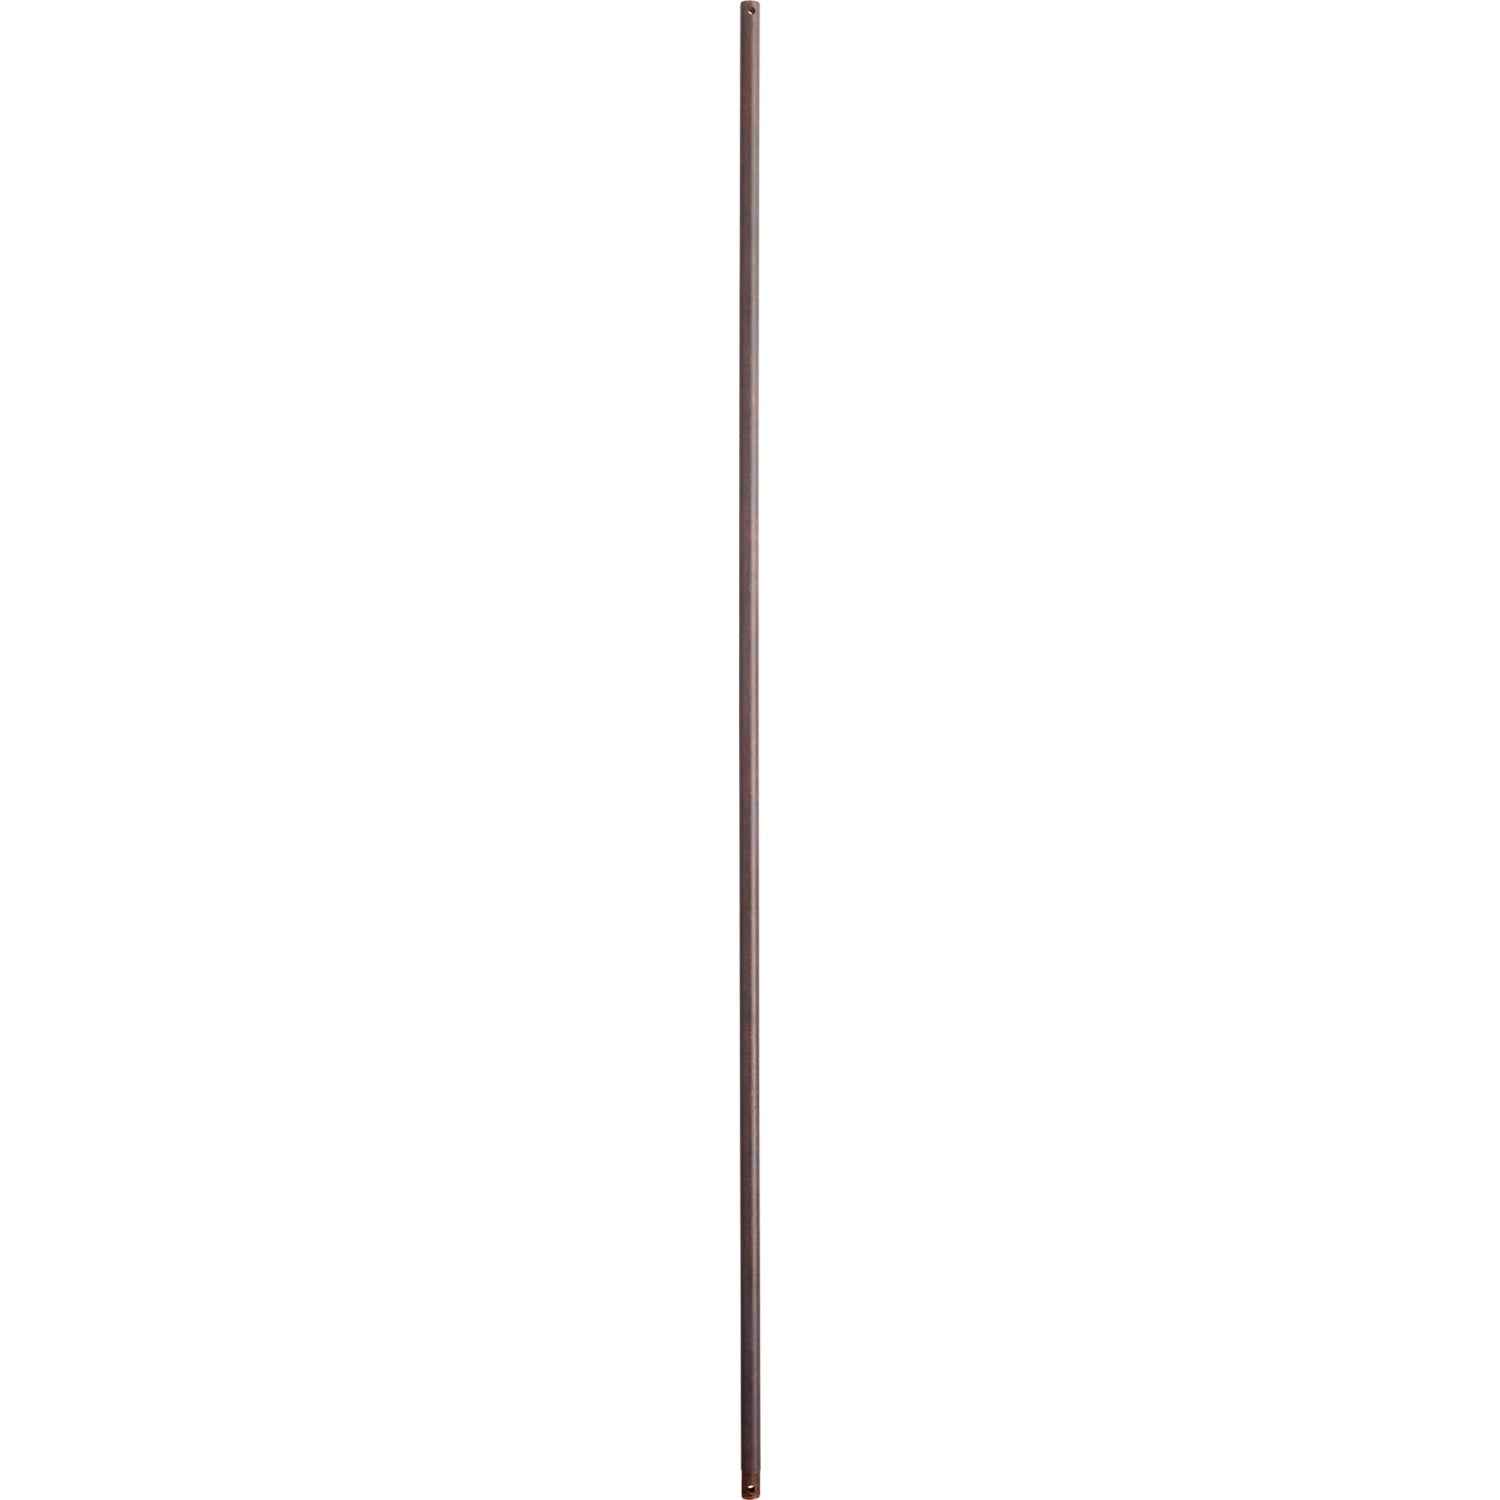 Quorum - 6-6044 - 60" Universal Downrod - 60 in. Downrods - Toasted Sienna